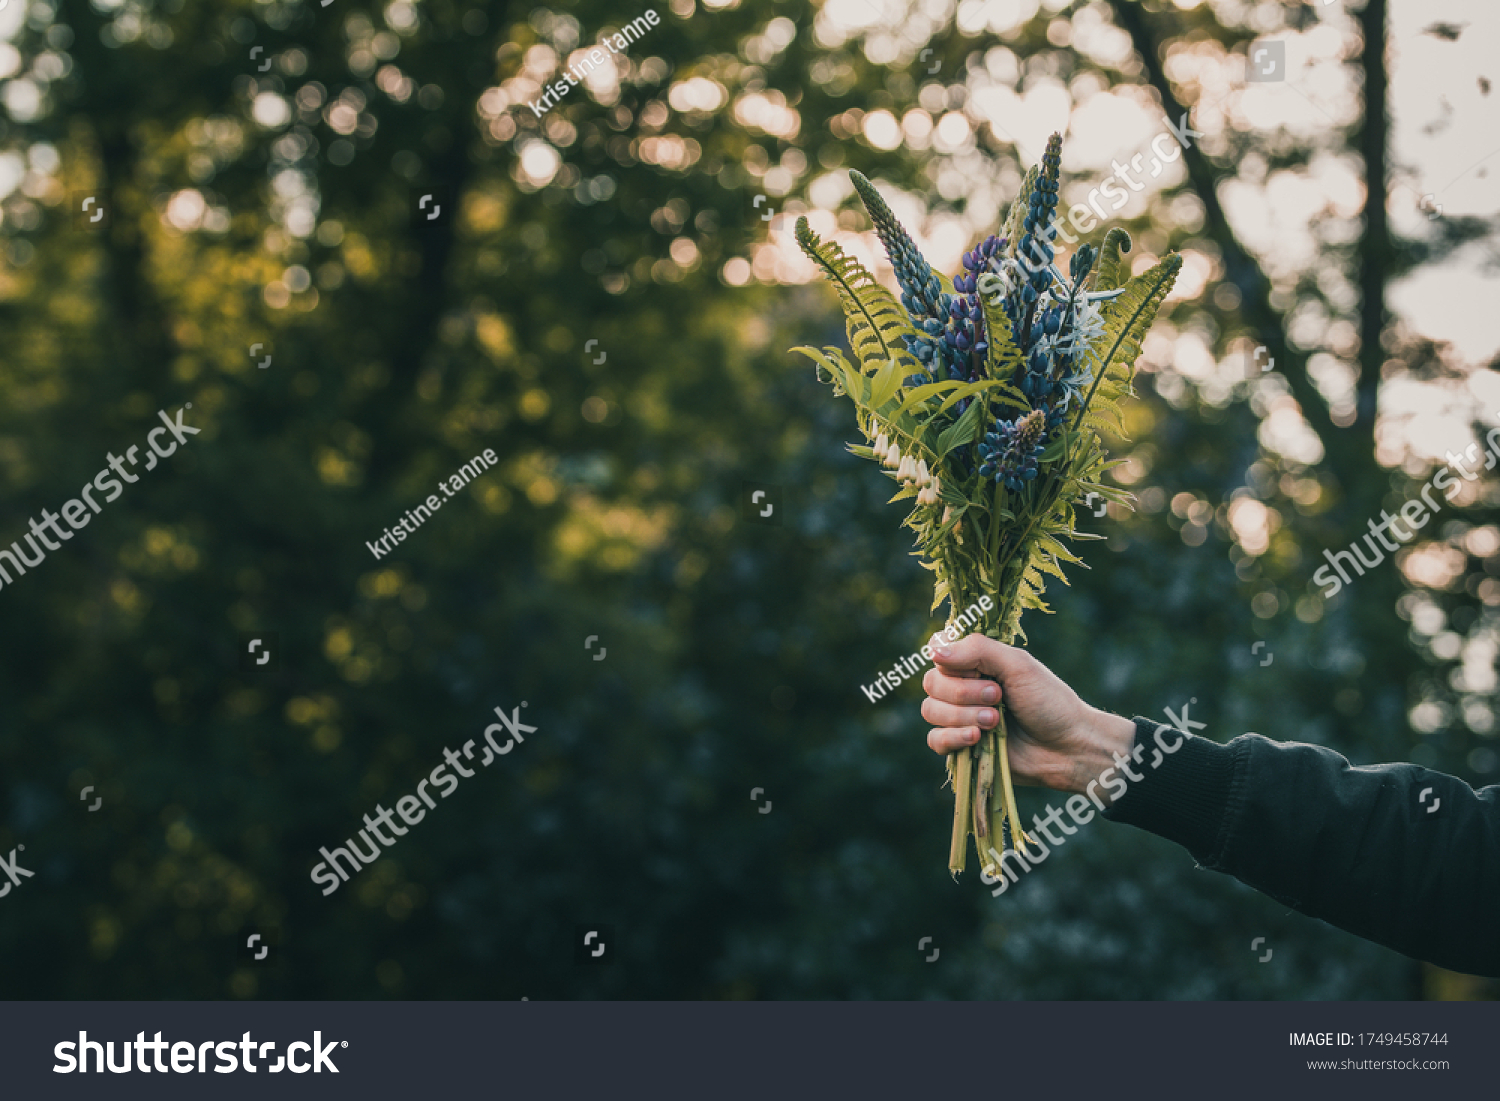 Male hand holding a bouquet of midsummer themed flowers. Fern, lupine and other meadow flowers with golden backlighting from the Sun, creating bokeh bubbles. Shallow depth of field. Dark, moody tones #1749458744